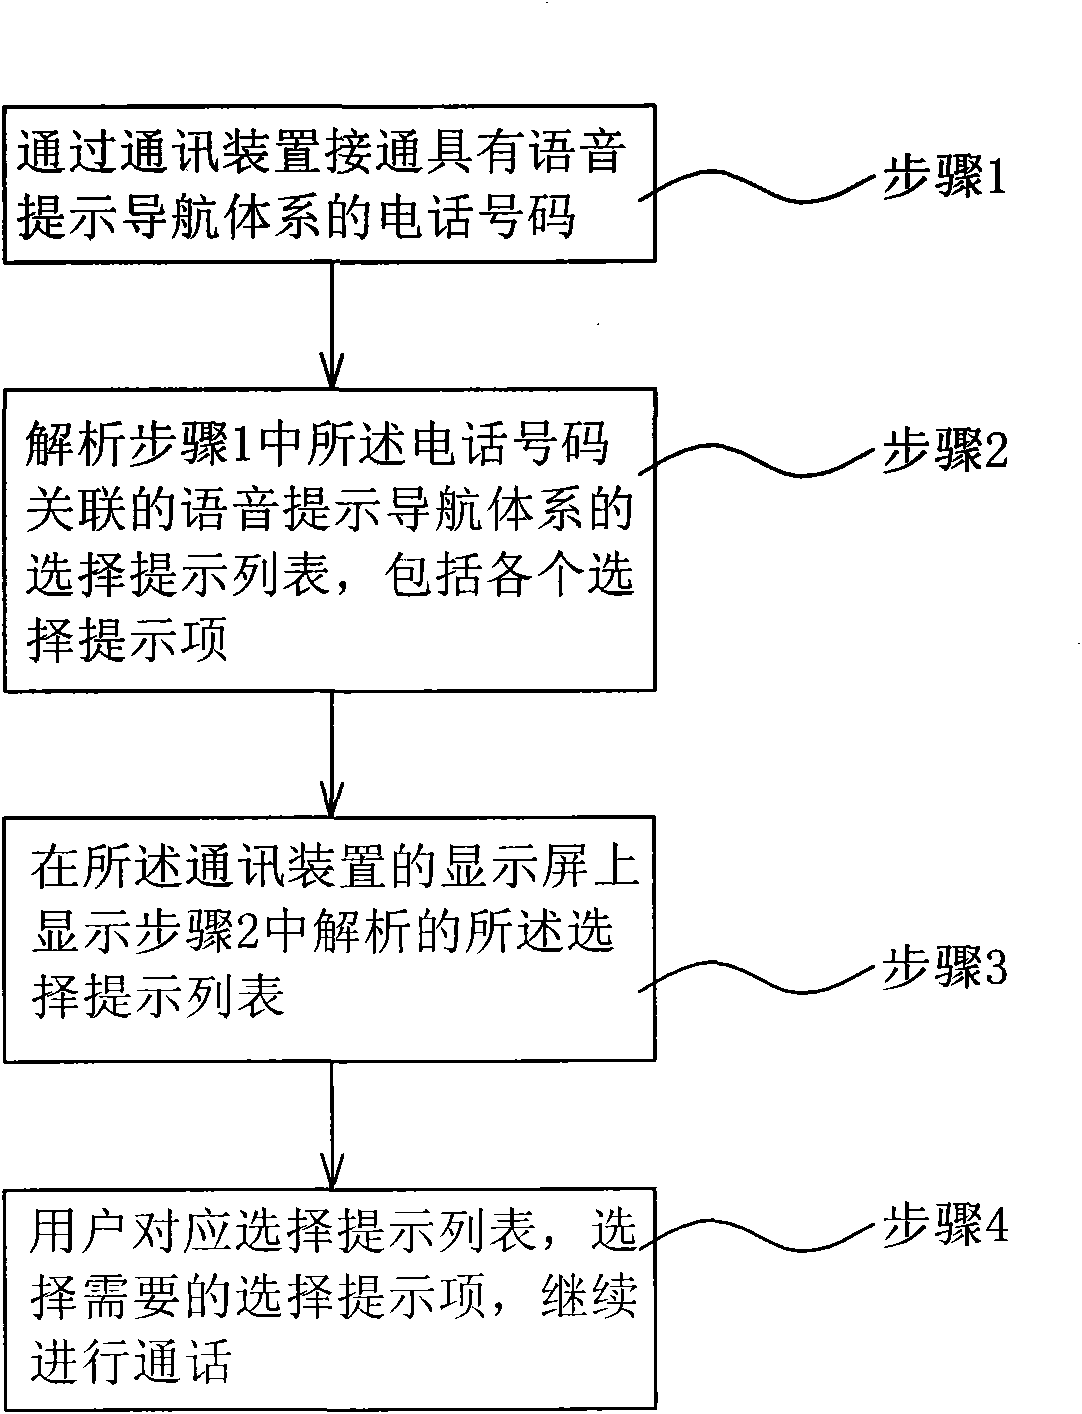 Communication device display screen-based list selection system and method